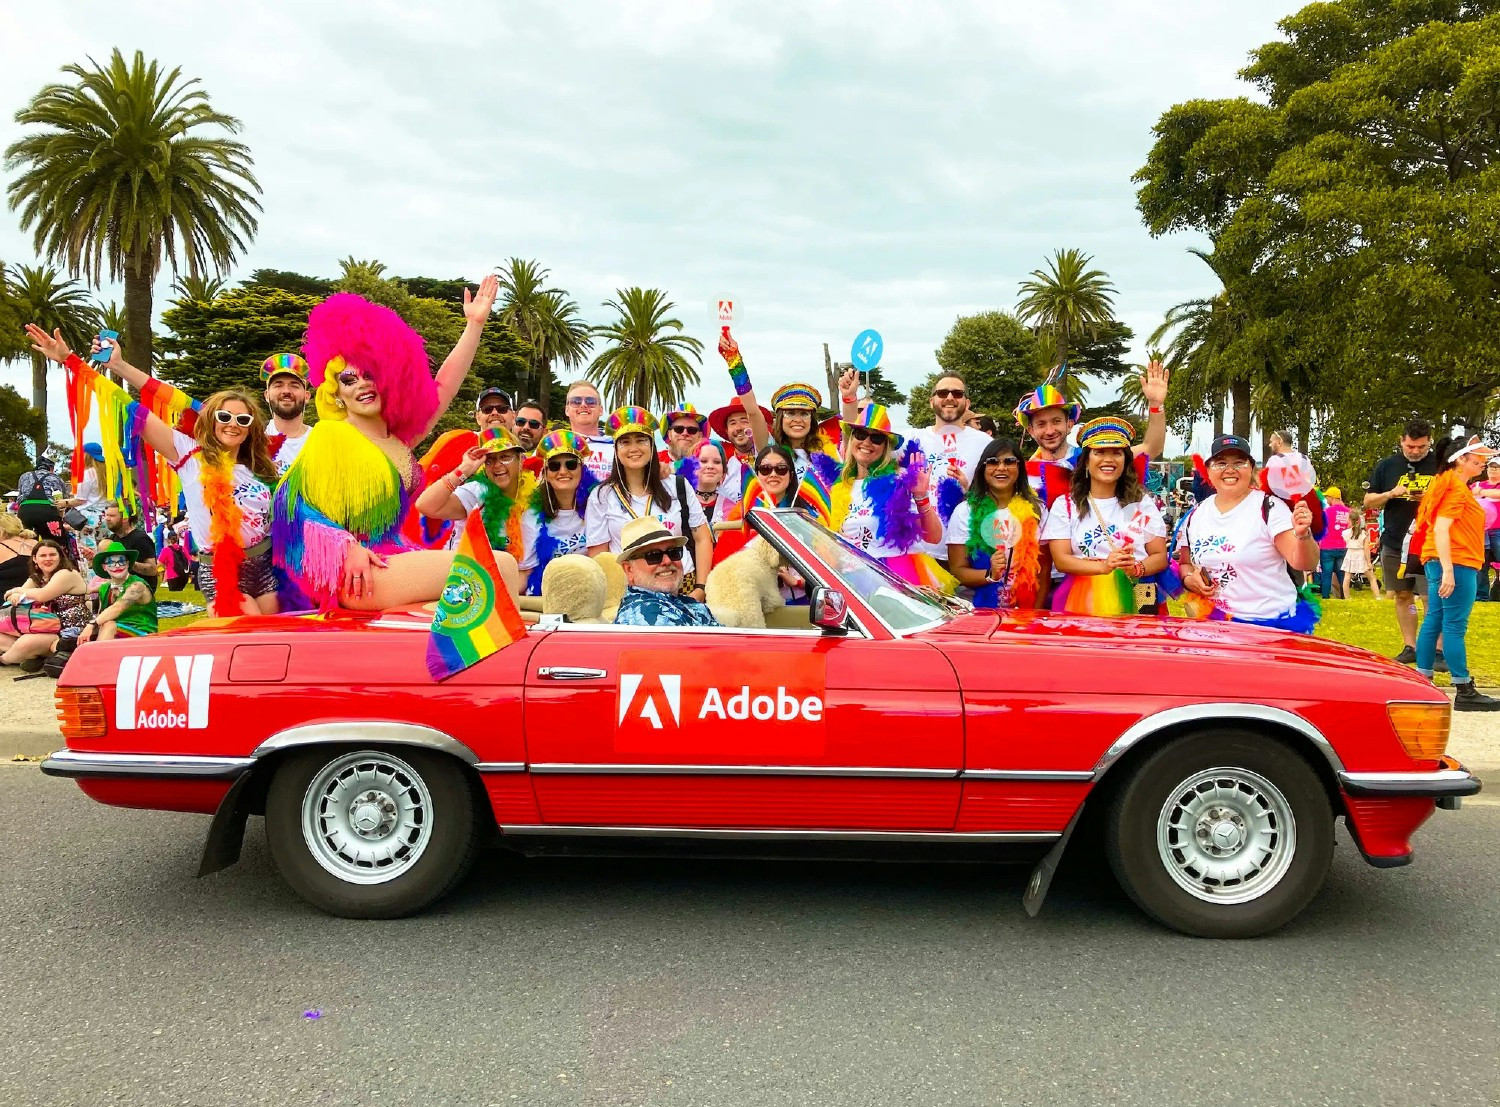 Adobe employees celebrating Pride in Australia at the Midsumma Festival, an annual event for the LGBTQIA+ community.